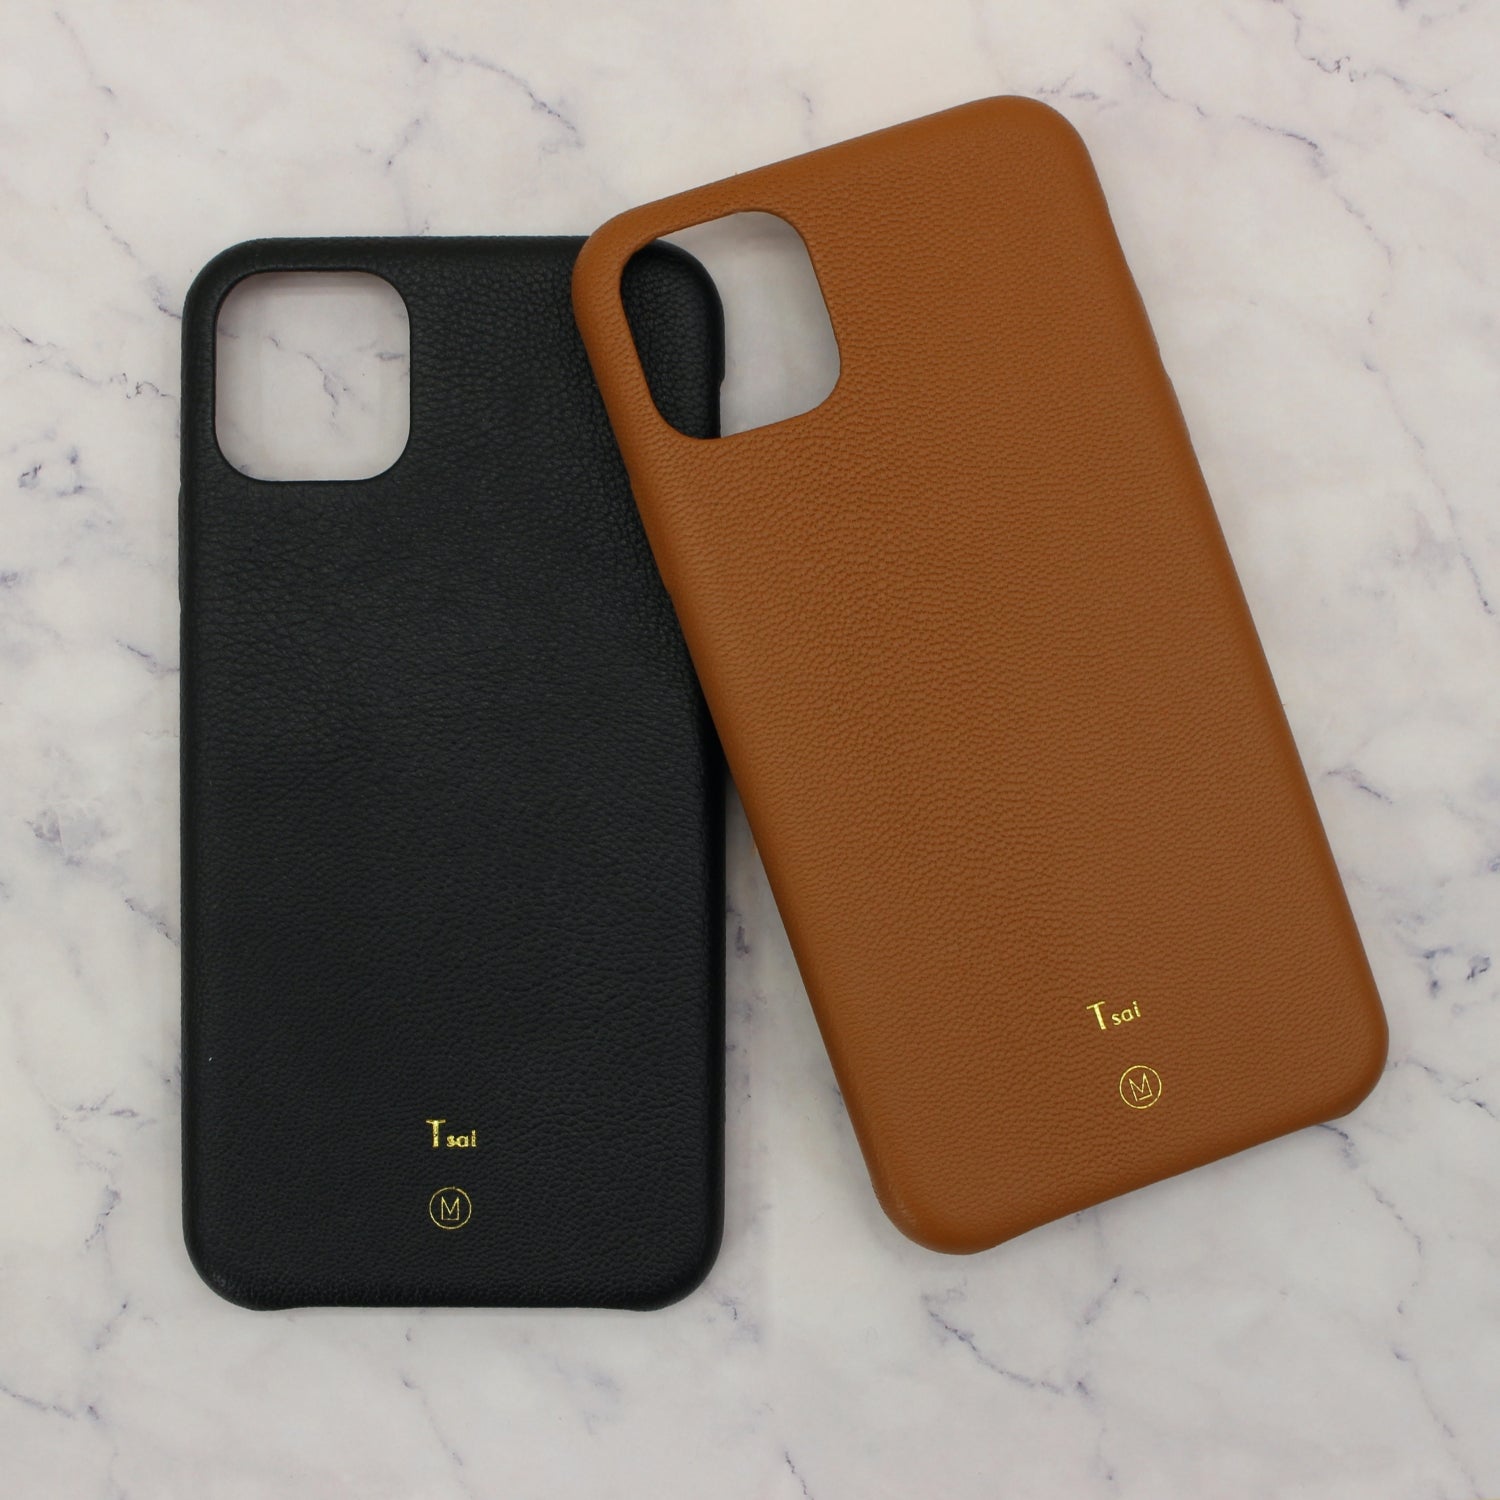 Get 2 Leather iPhone Cases at 15% off, so you can express yourself in different colors or match your iPhone with different outfits.